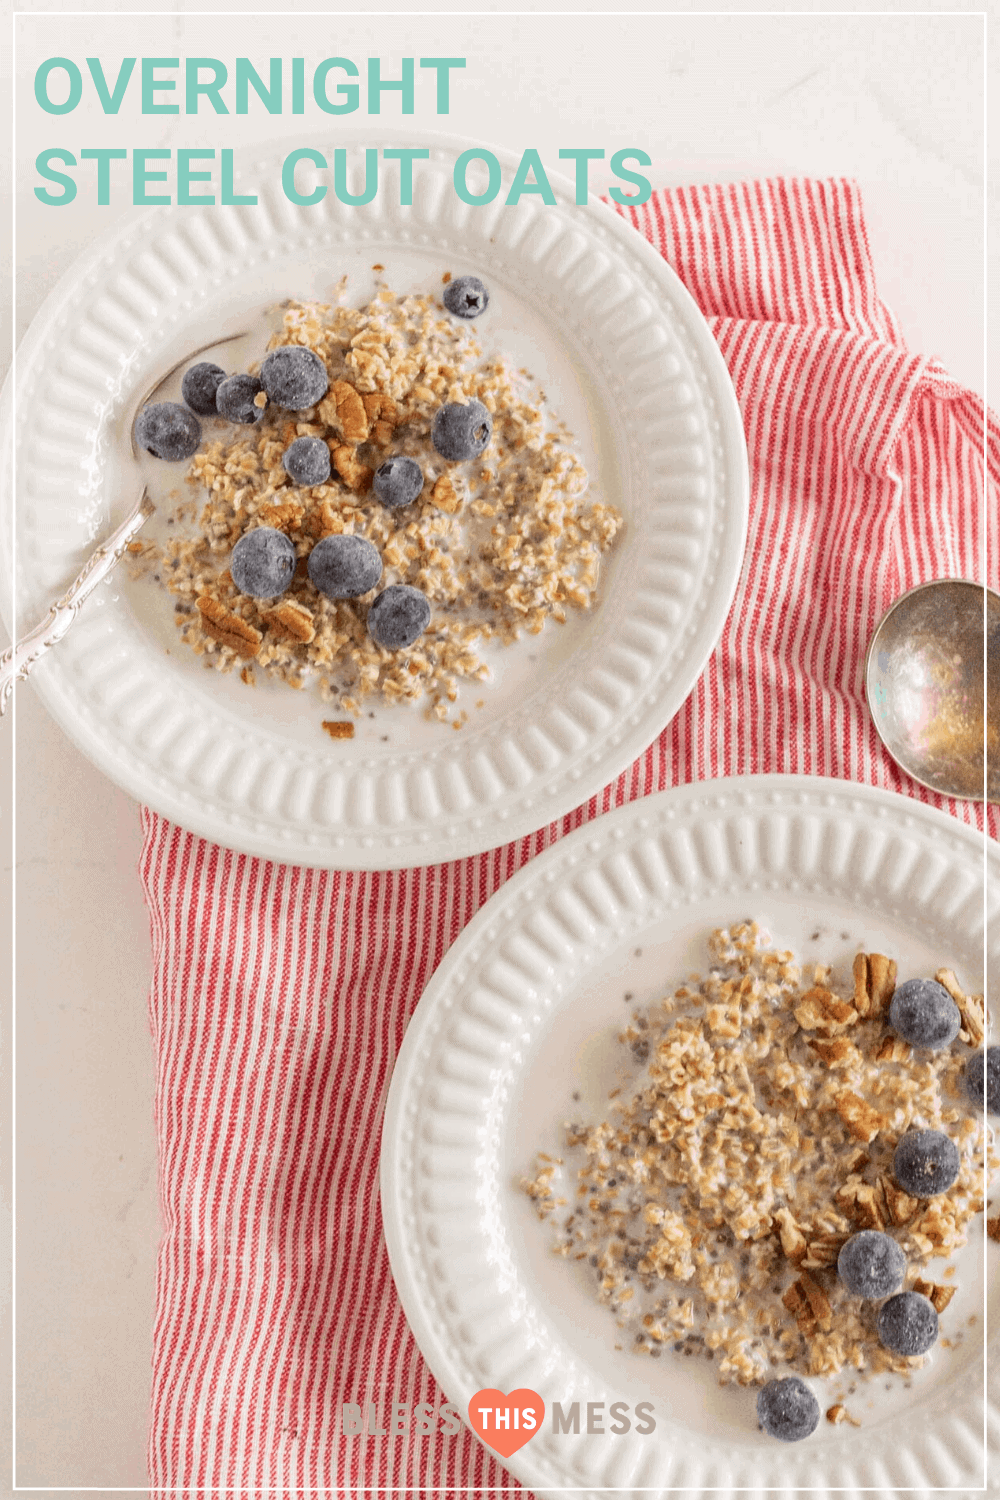 https://www.blessthismessplease.com/wp-content/uploads/2014/09/OVERNIGHT-STEEL-CUT-OATS-Bless-This-Mess.png